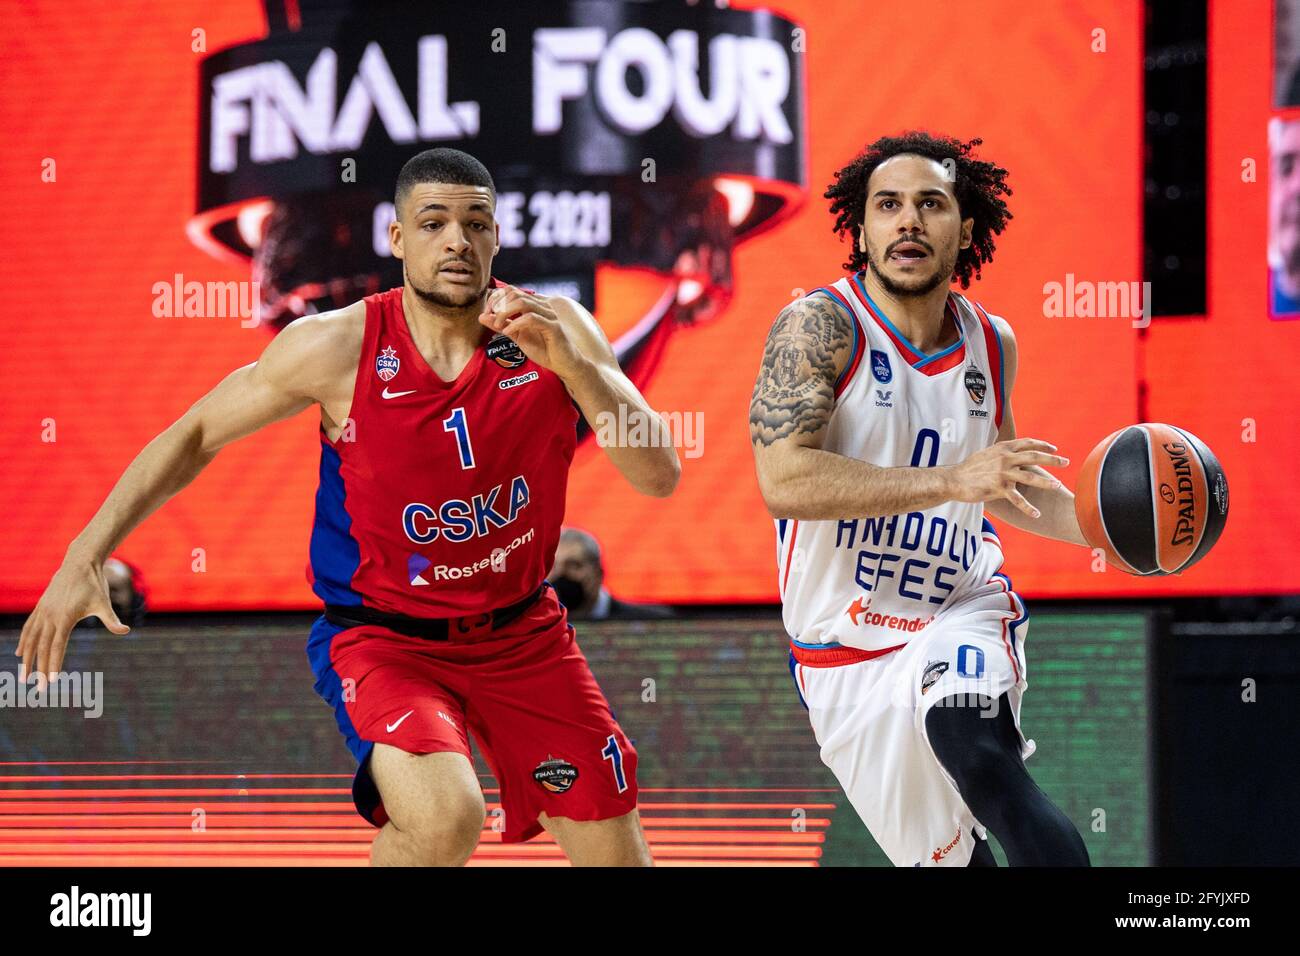 Cologne, Germany. 28th May, 2021. Basketball: Euroleague, ZSKA Moscow -  Anadolu Efes Istanbul, Final Four, Semifinals. Istanbul's Shane Larkin (r)  and Moscow's Iffe Lundberg fight for the ball. Credit: Marius  Becker/dpa/Alamy Live